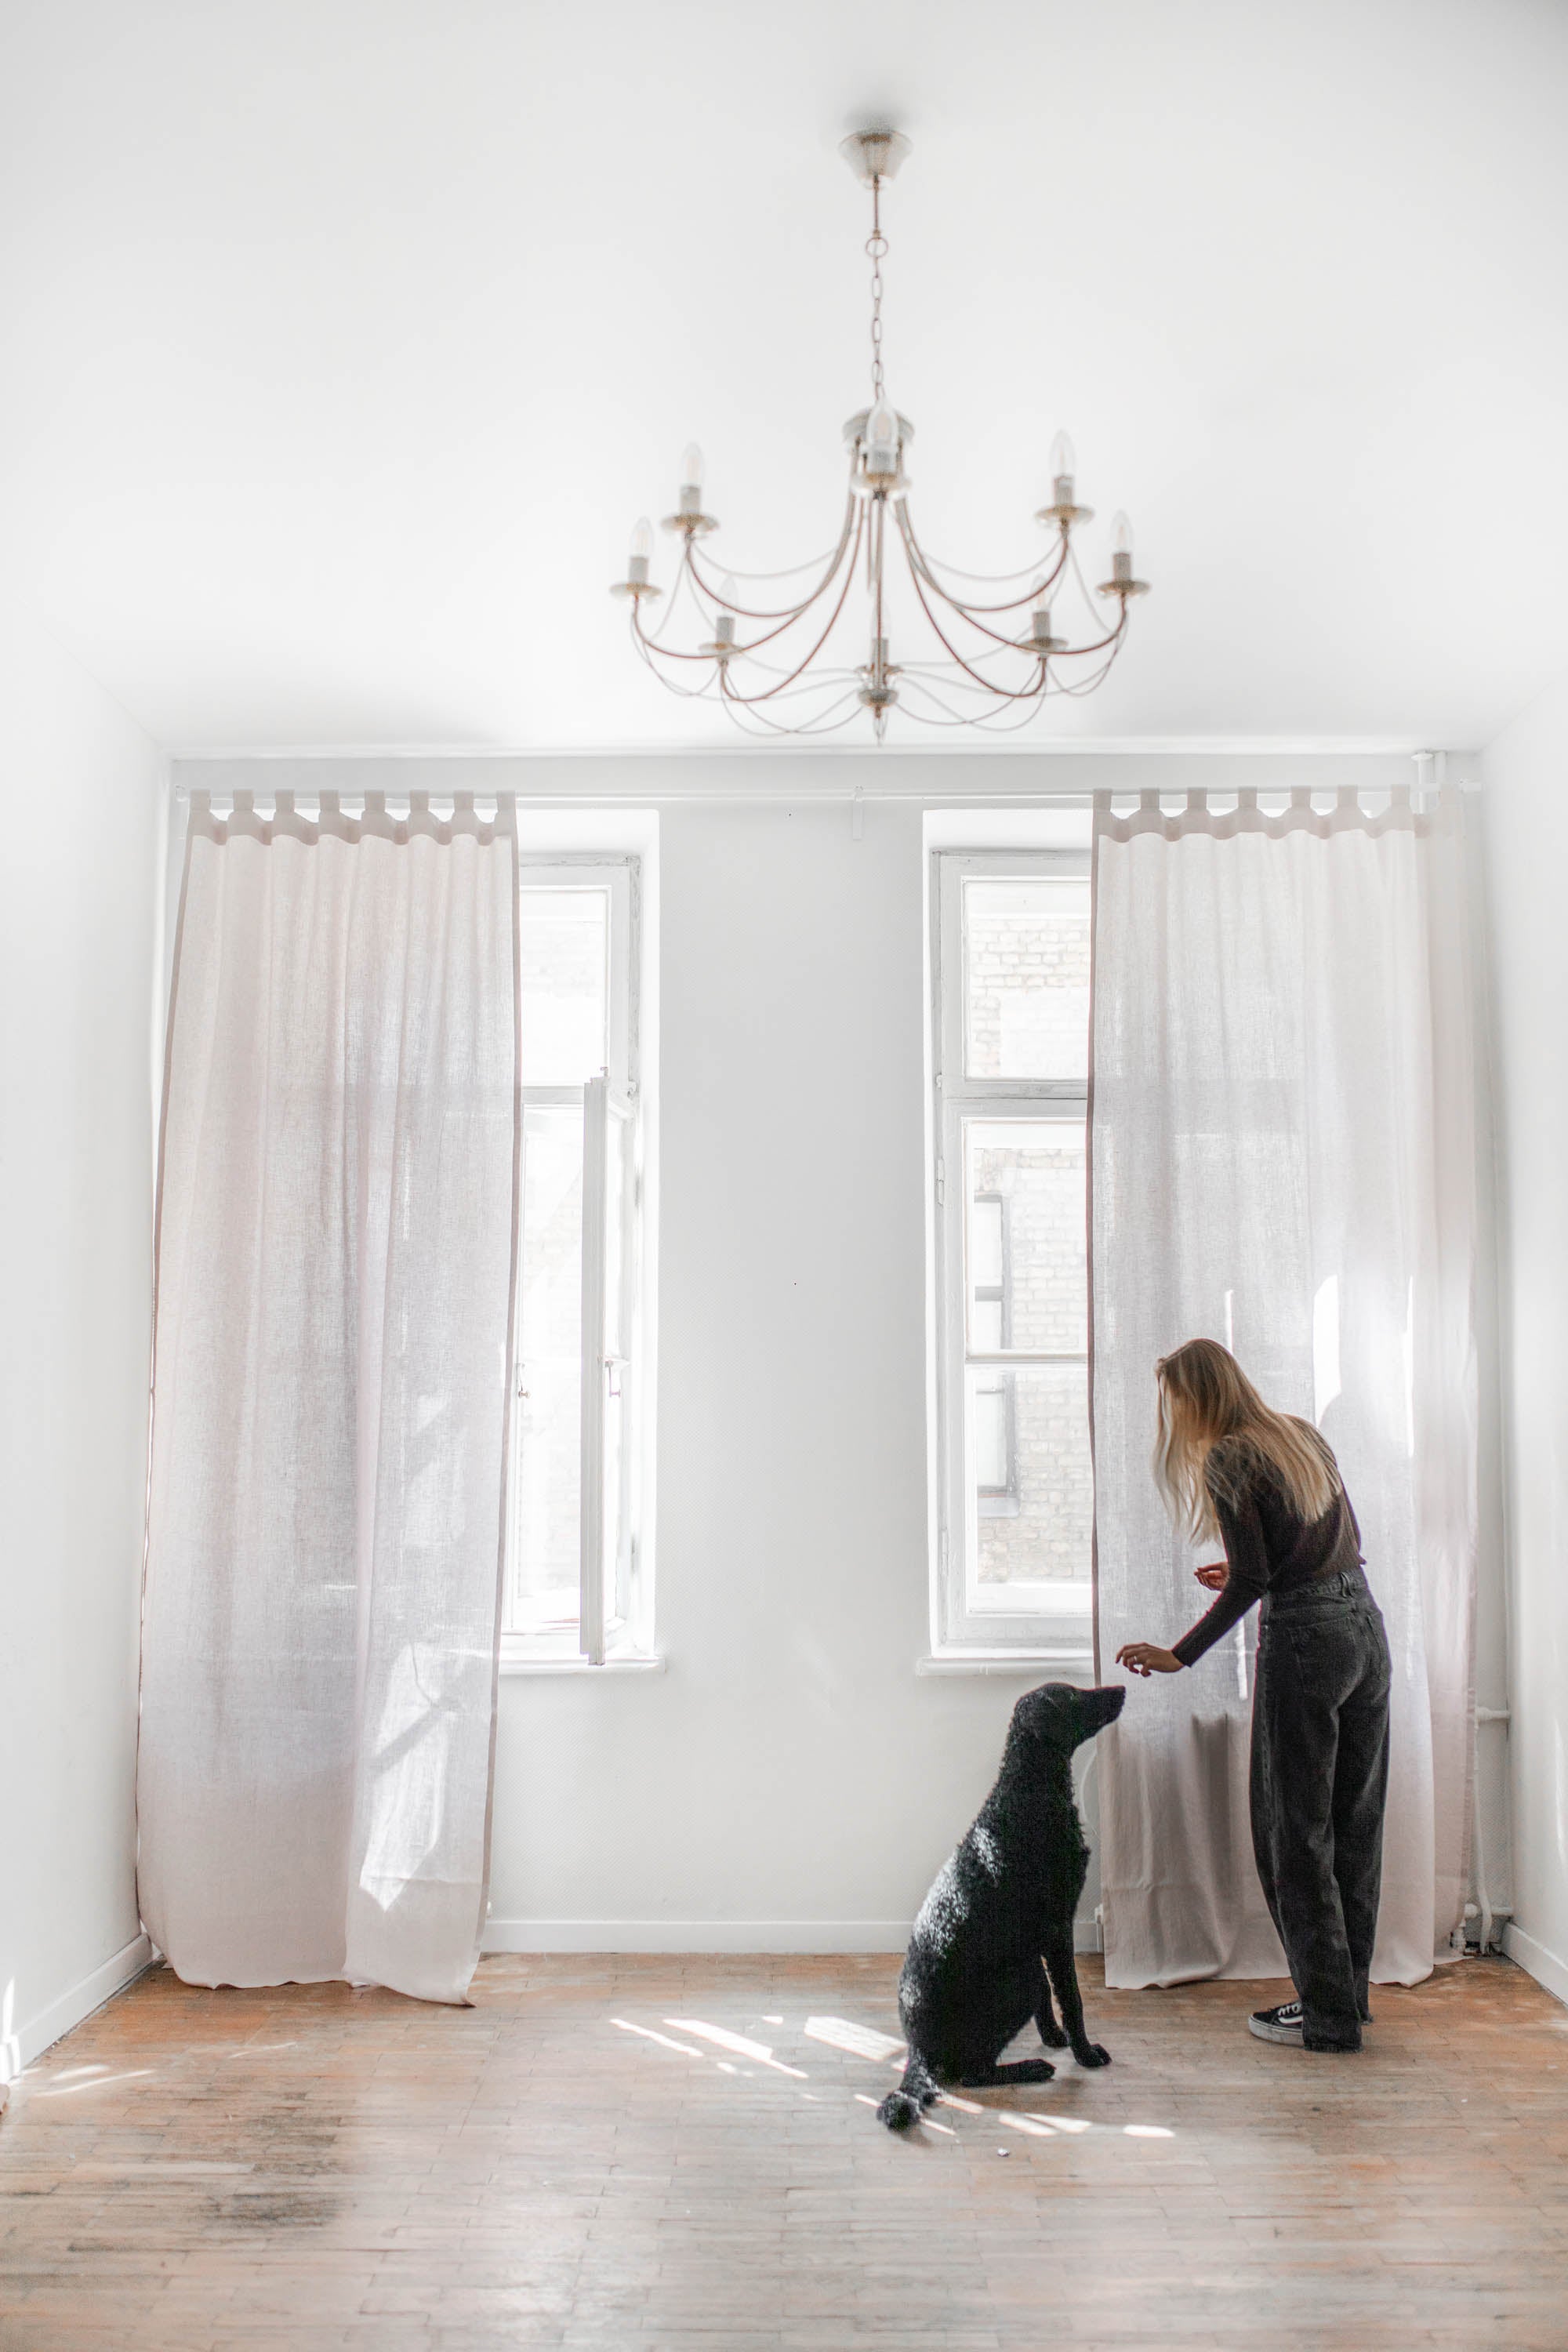 White Spacious Room WIth Cotton Candy Tab Top Linen Curtains Accompanied A Dog and Woman Playing